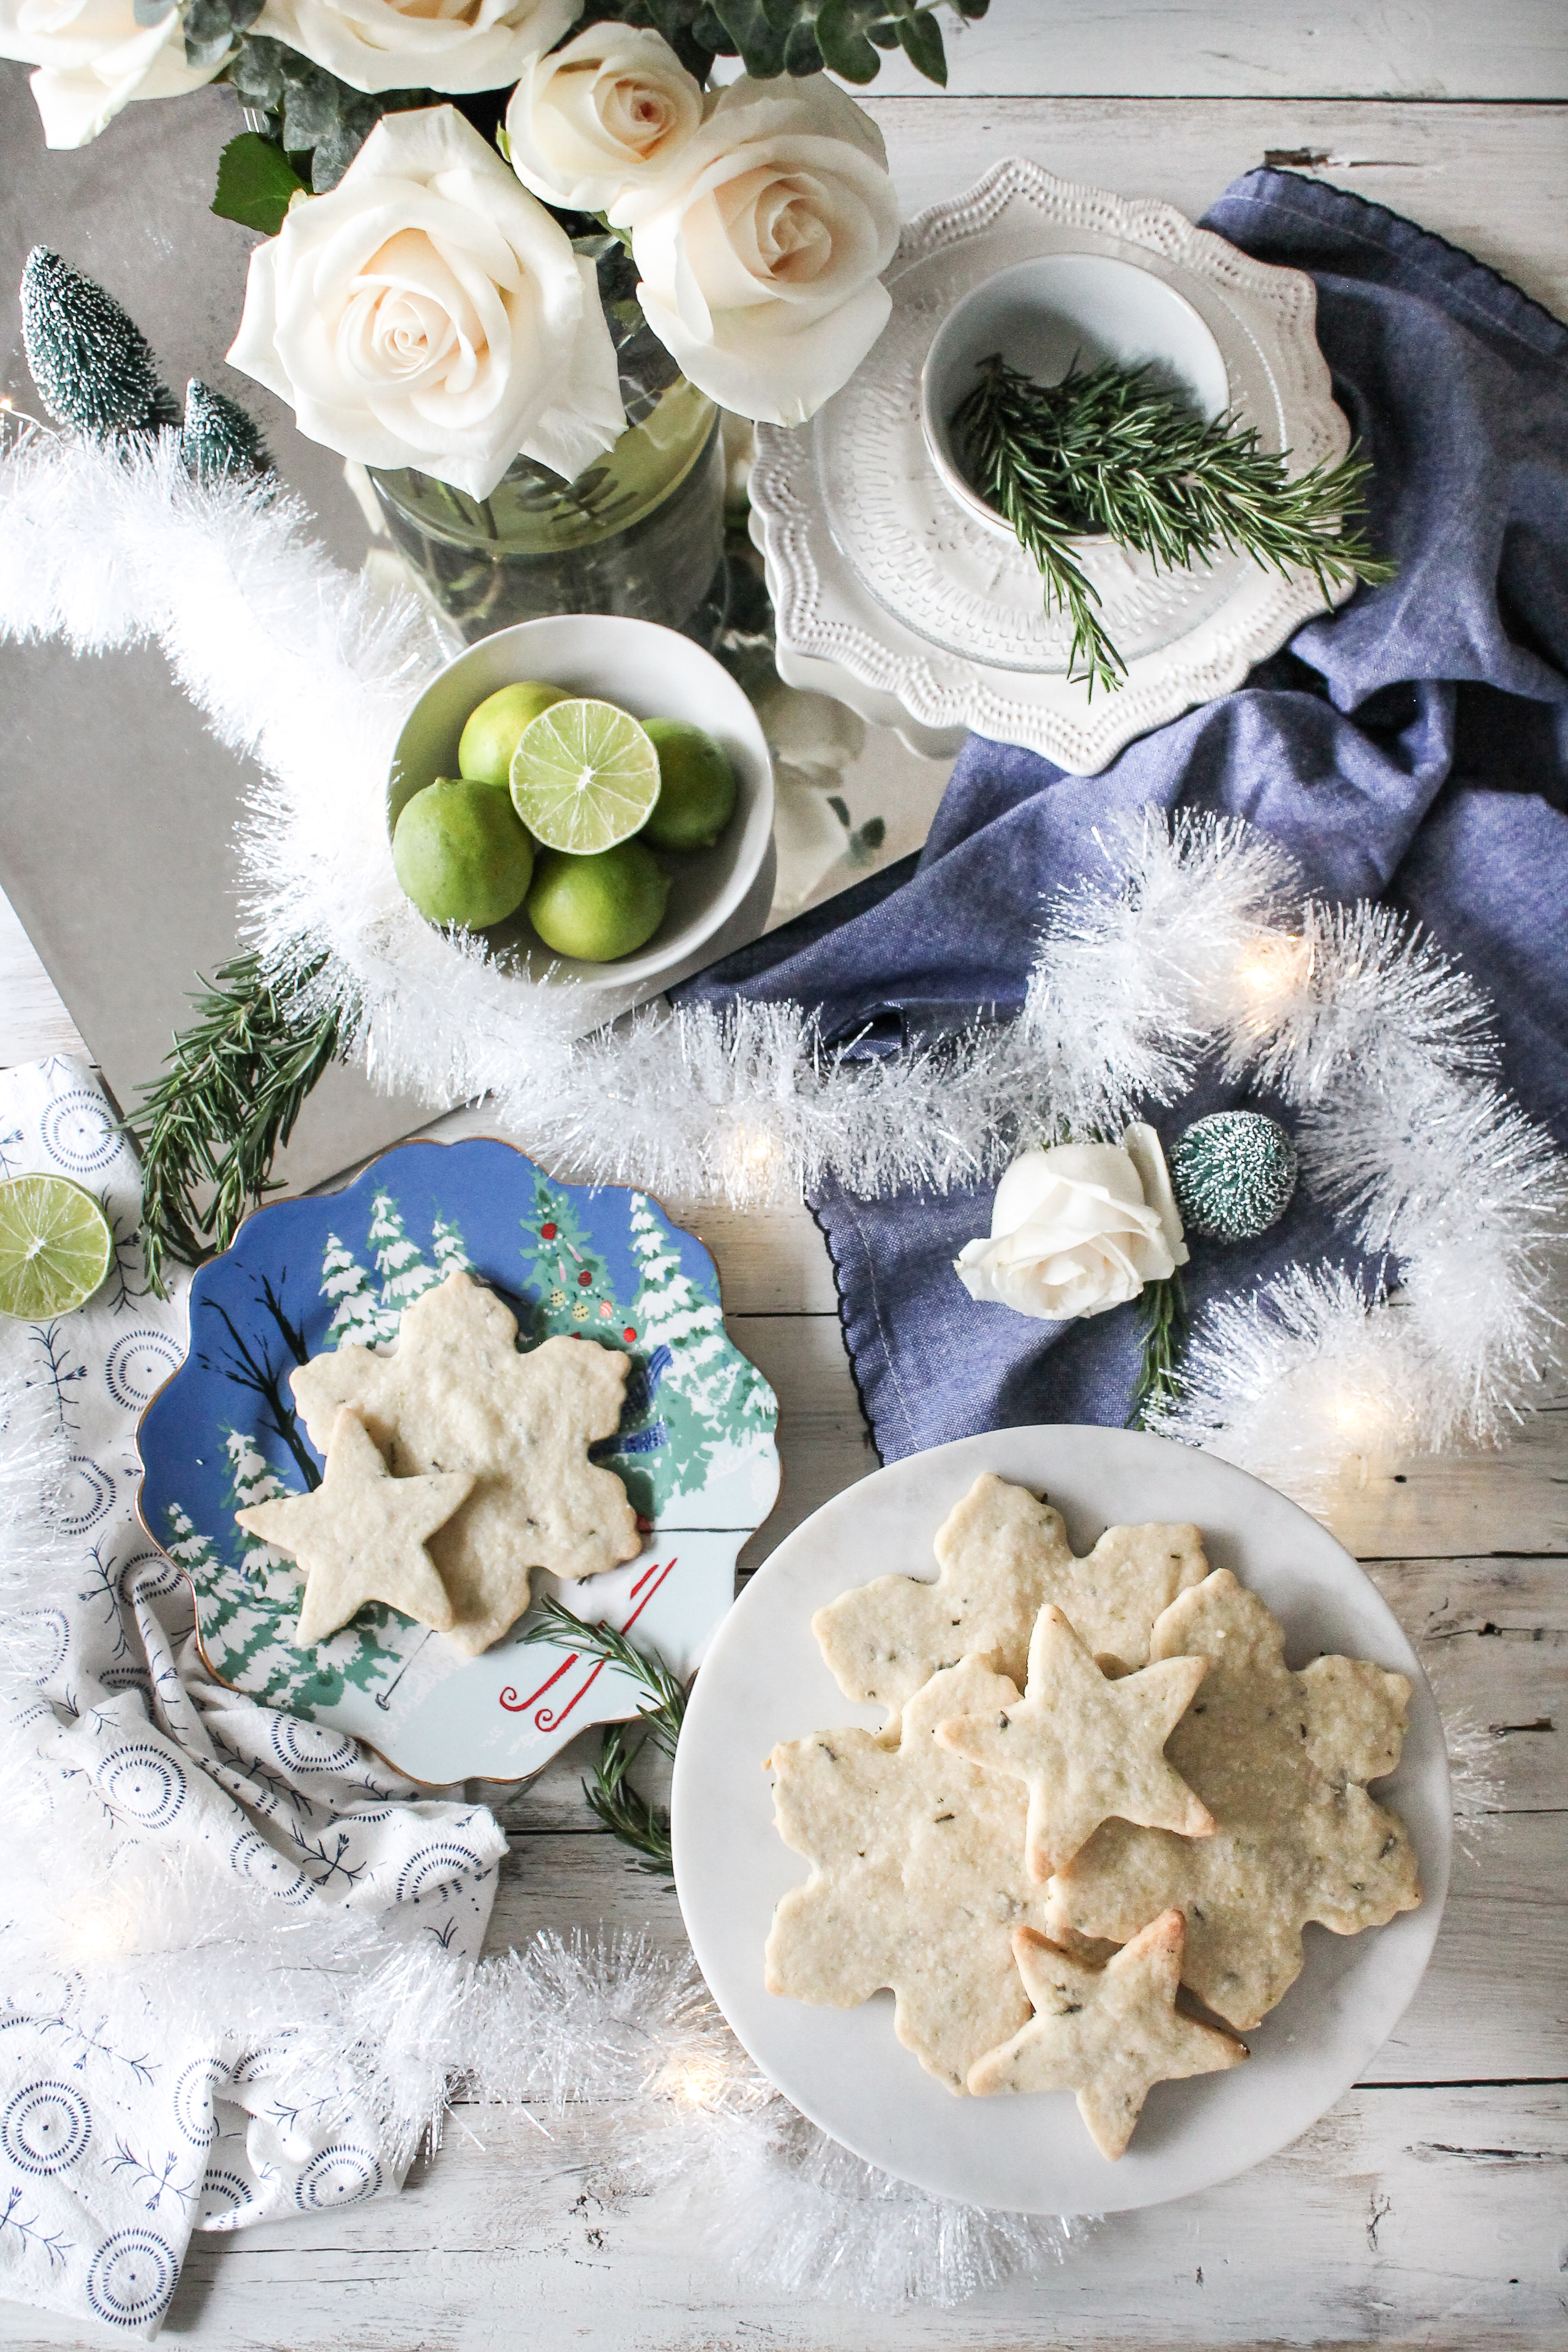 Rosemary Lime Shortbread Cookies are just what you need to get you through the early winter blues! These tasty treats still feel like Christmas, but with a fresh zing.